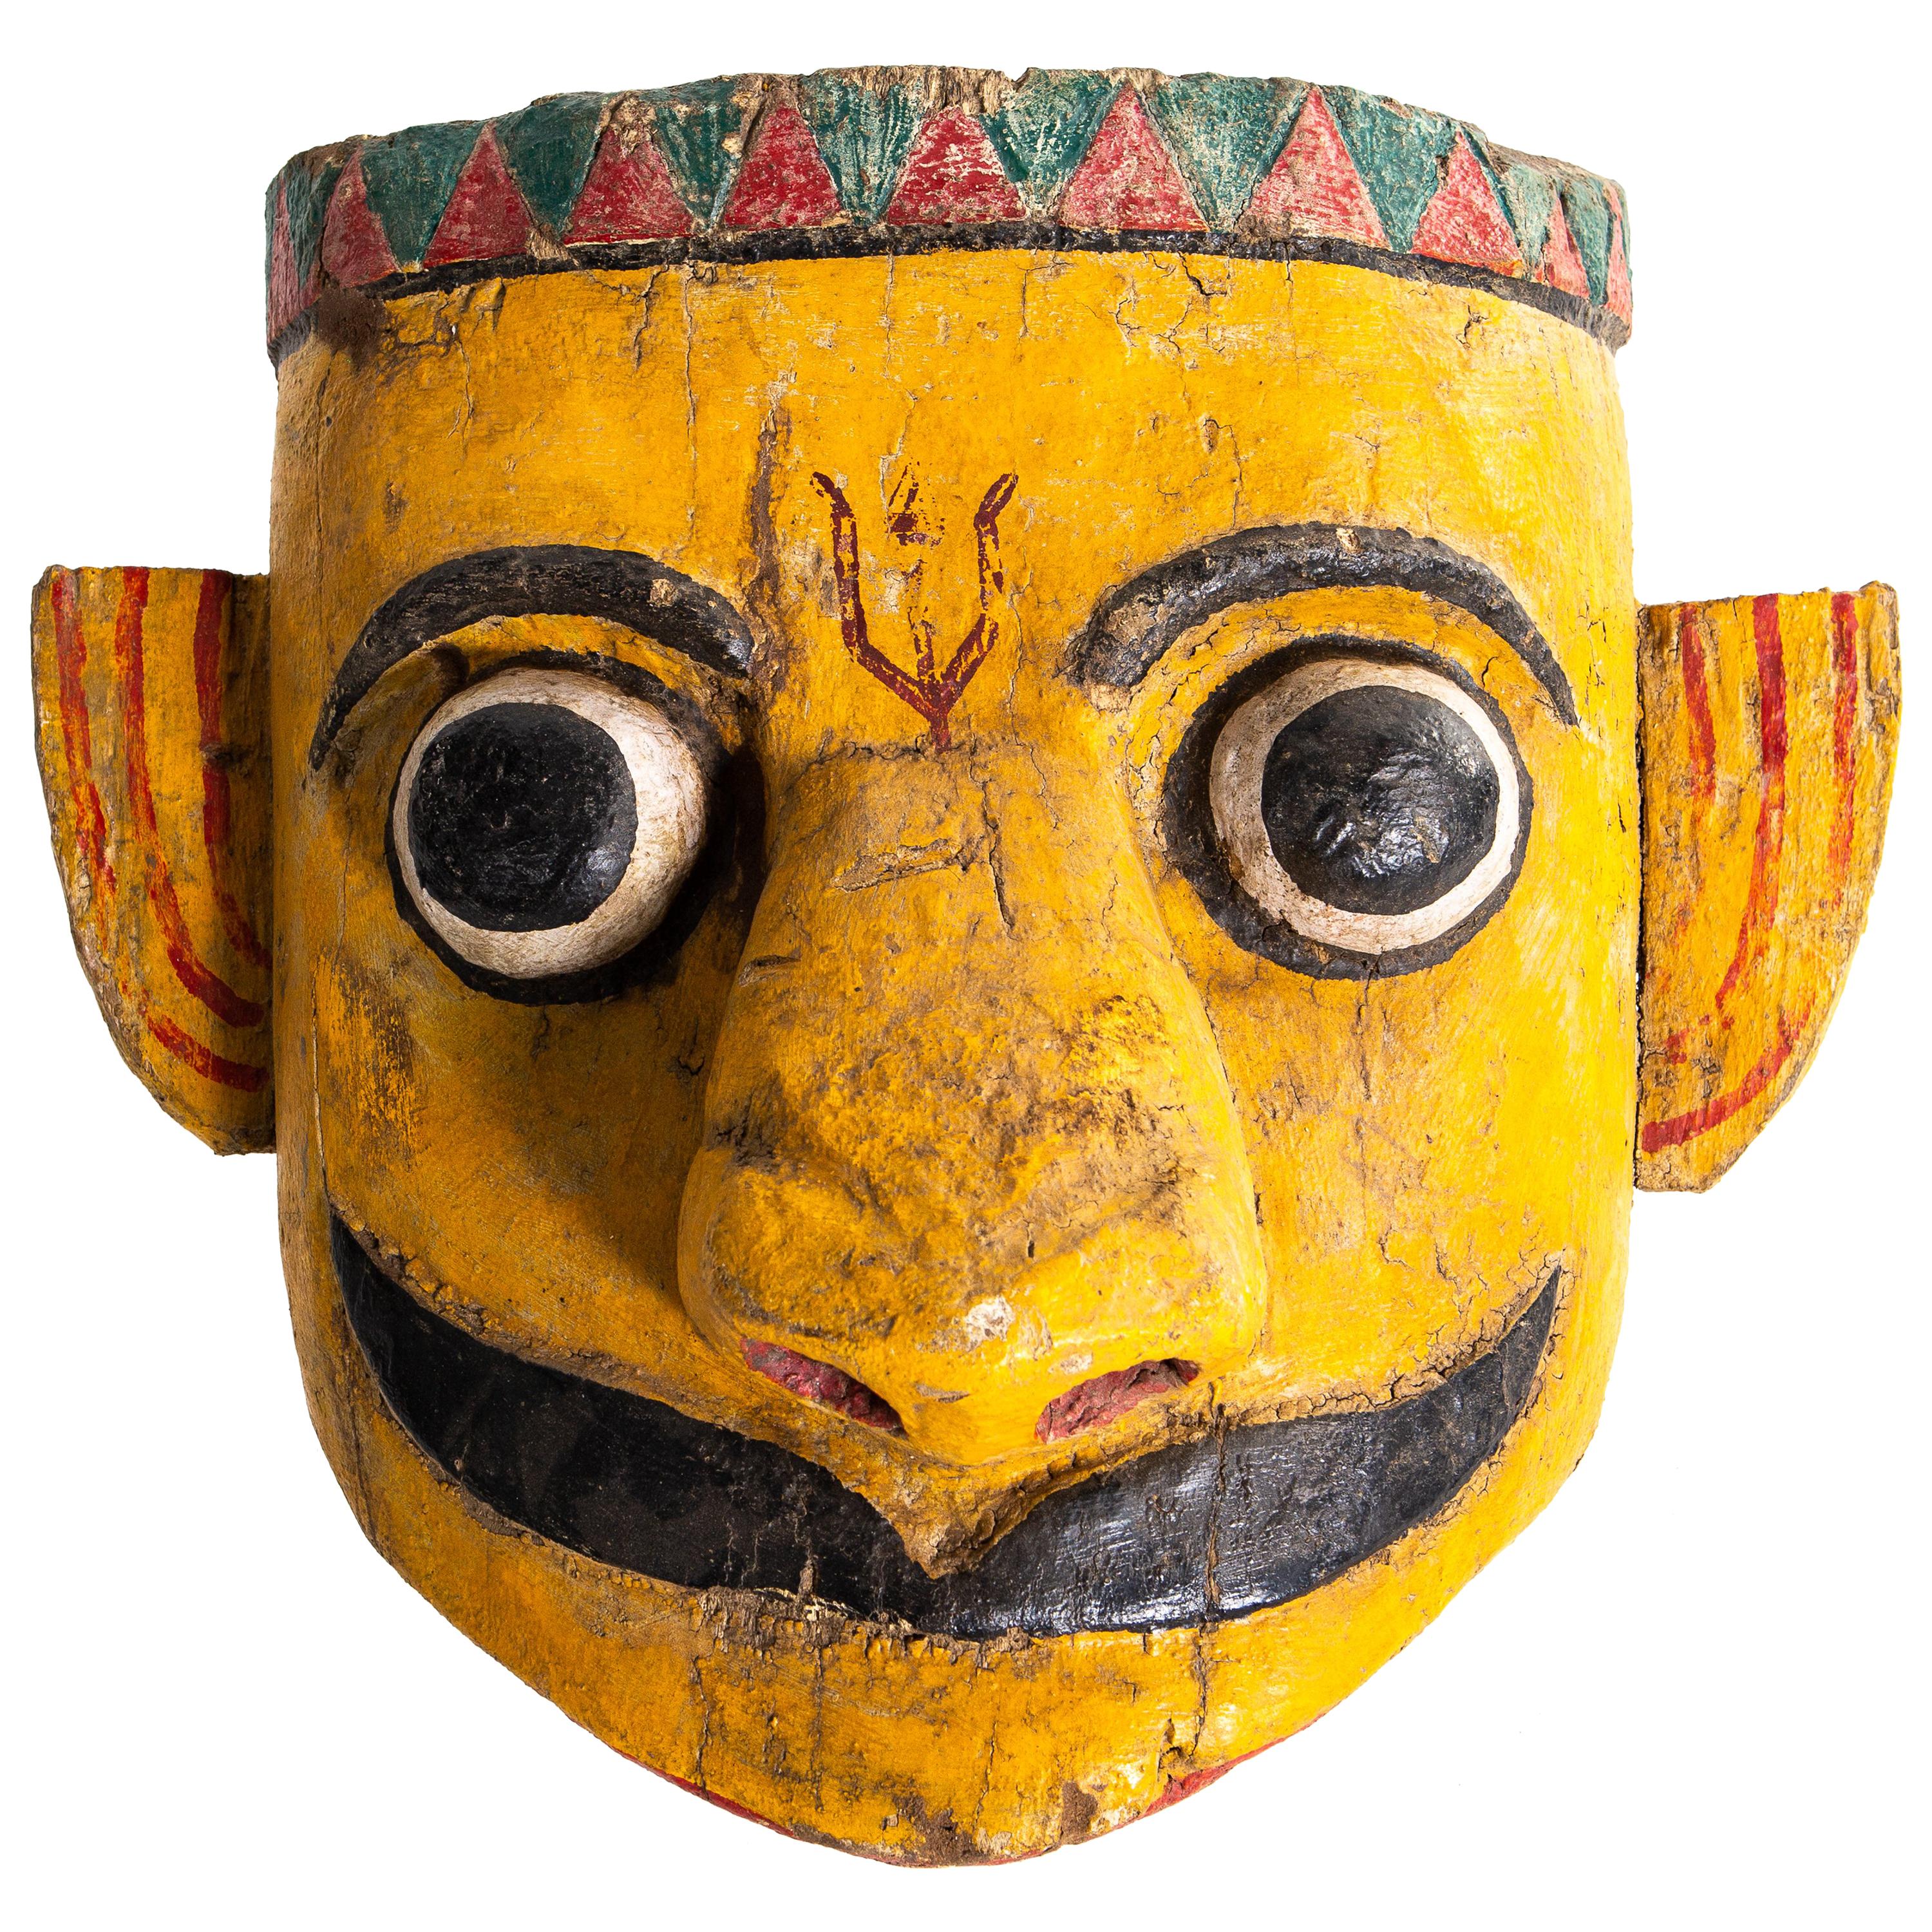 Indian Wooden Mask